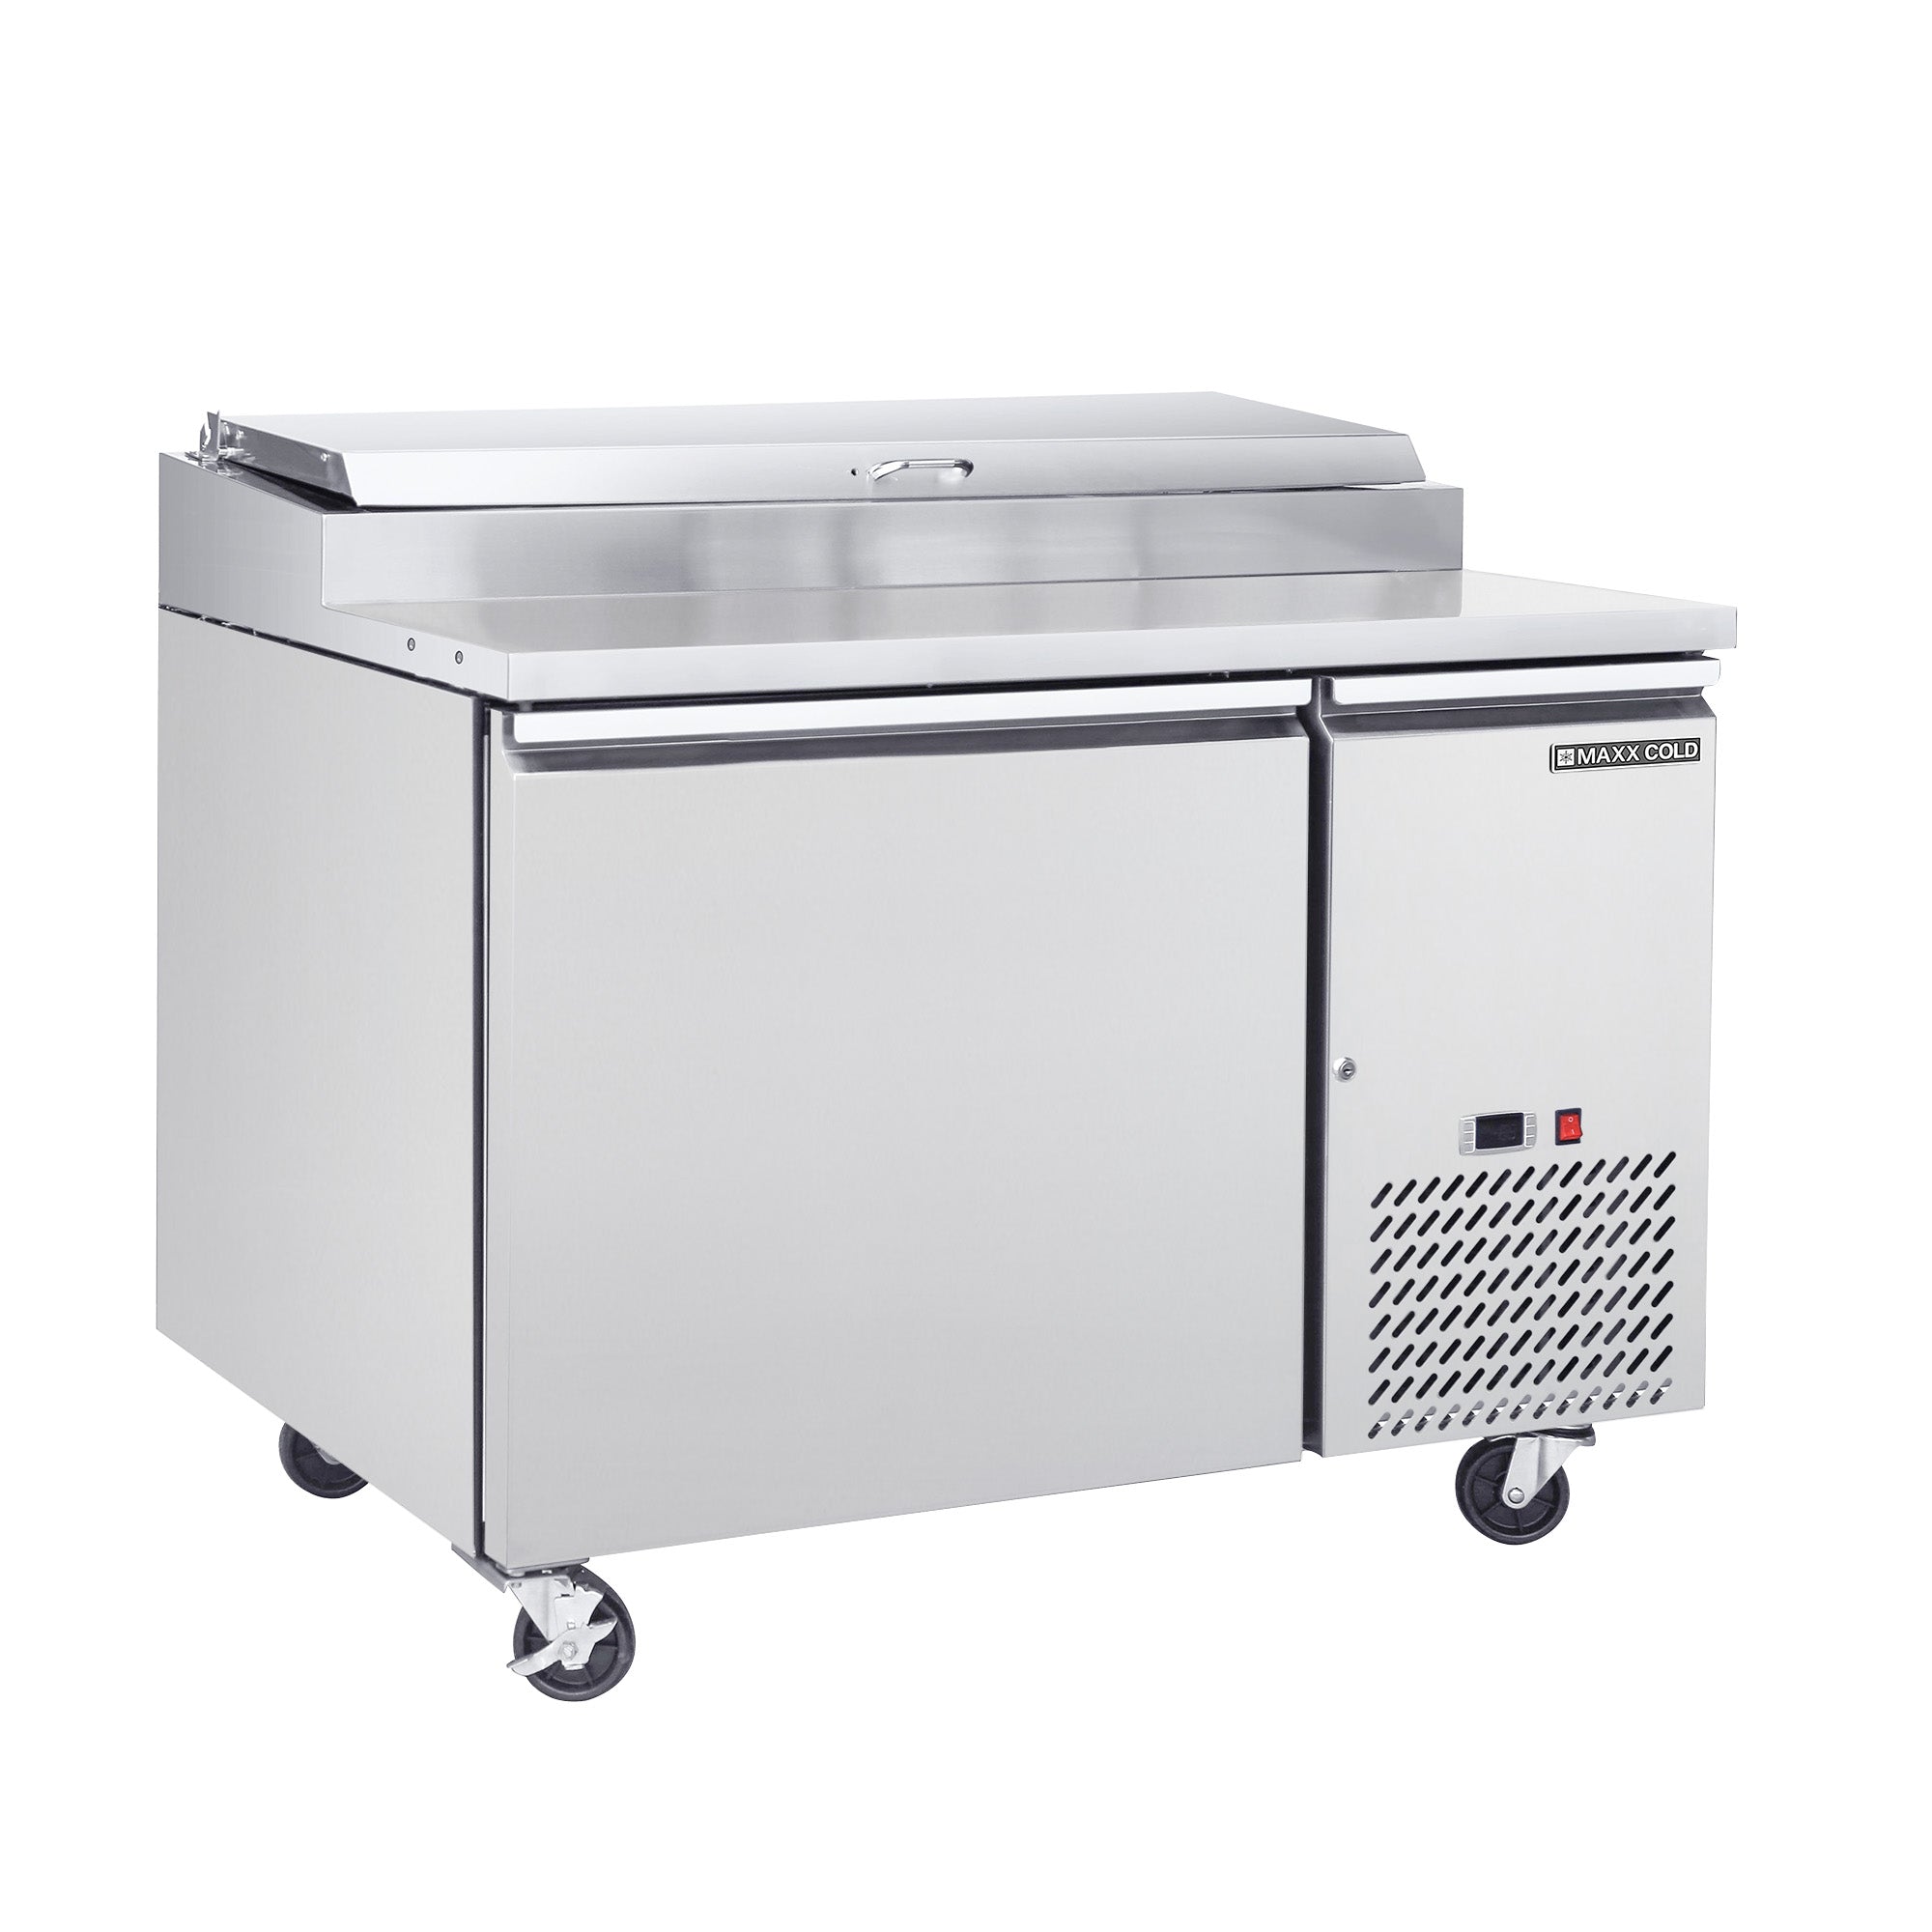 Maxx Cold - MXSPP50HC, Maxx Cold One-Door Refrigerated Pizza Prep Table, 47"W, 10.95 cu. ft. Storage Capacity, Equipped with (6) 4" Deep Pans and Cutting Board, in Stainless Steel